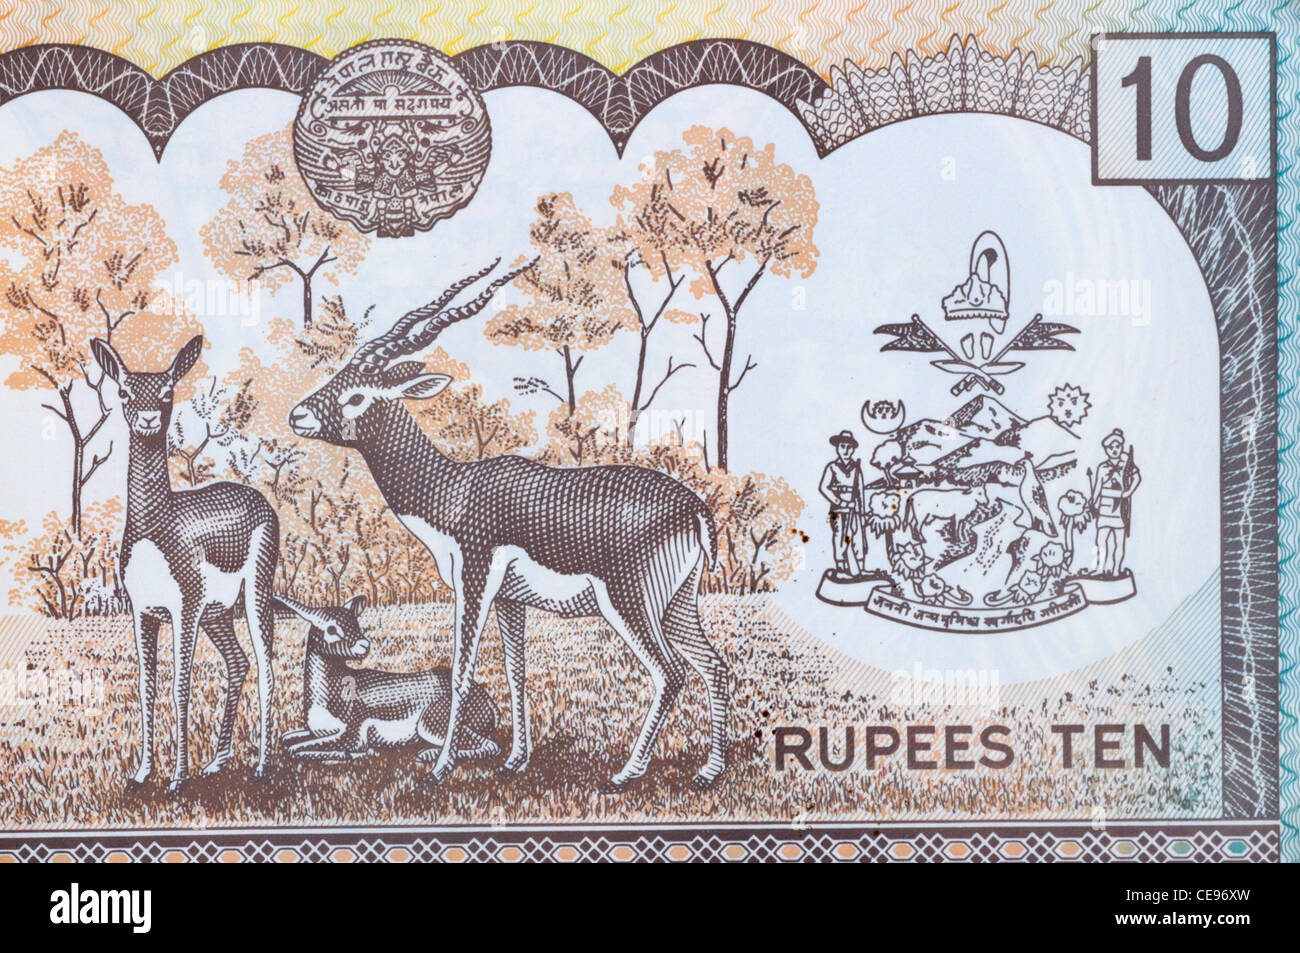 Nepal 10 Rupees Banknote Stock Photo